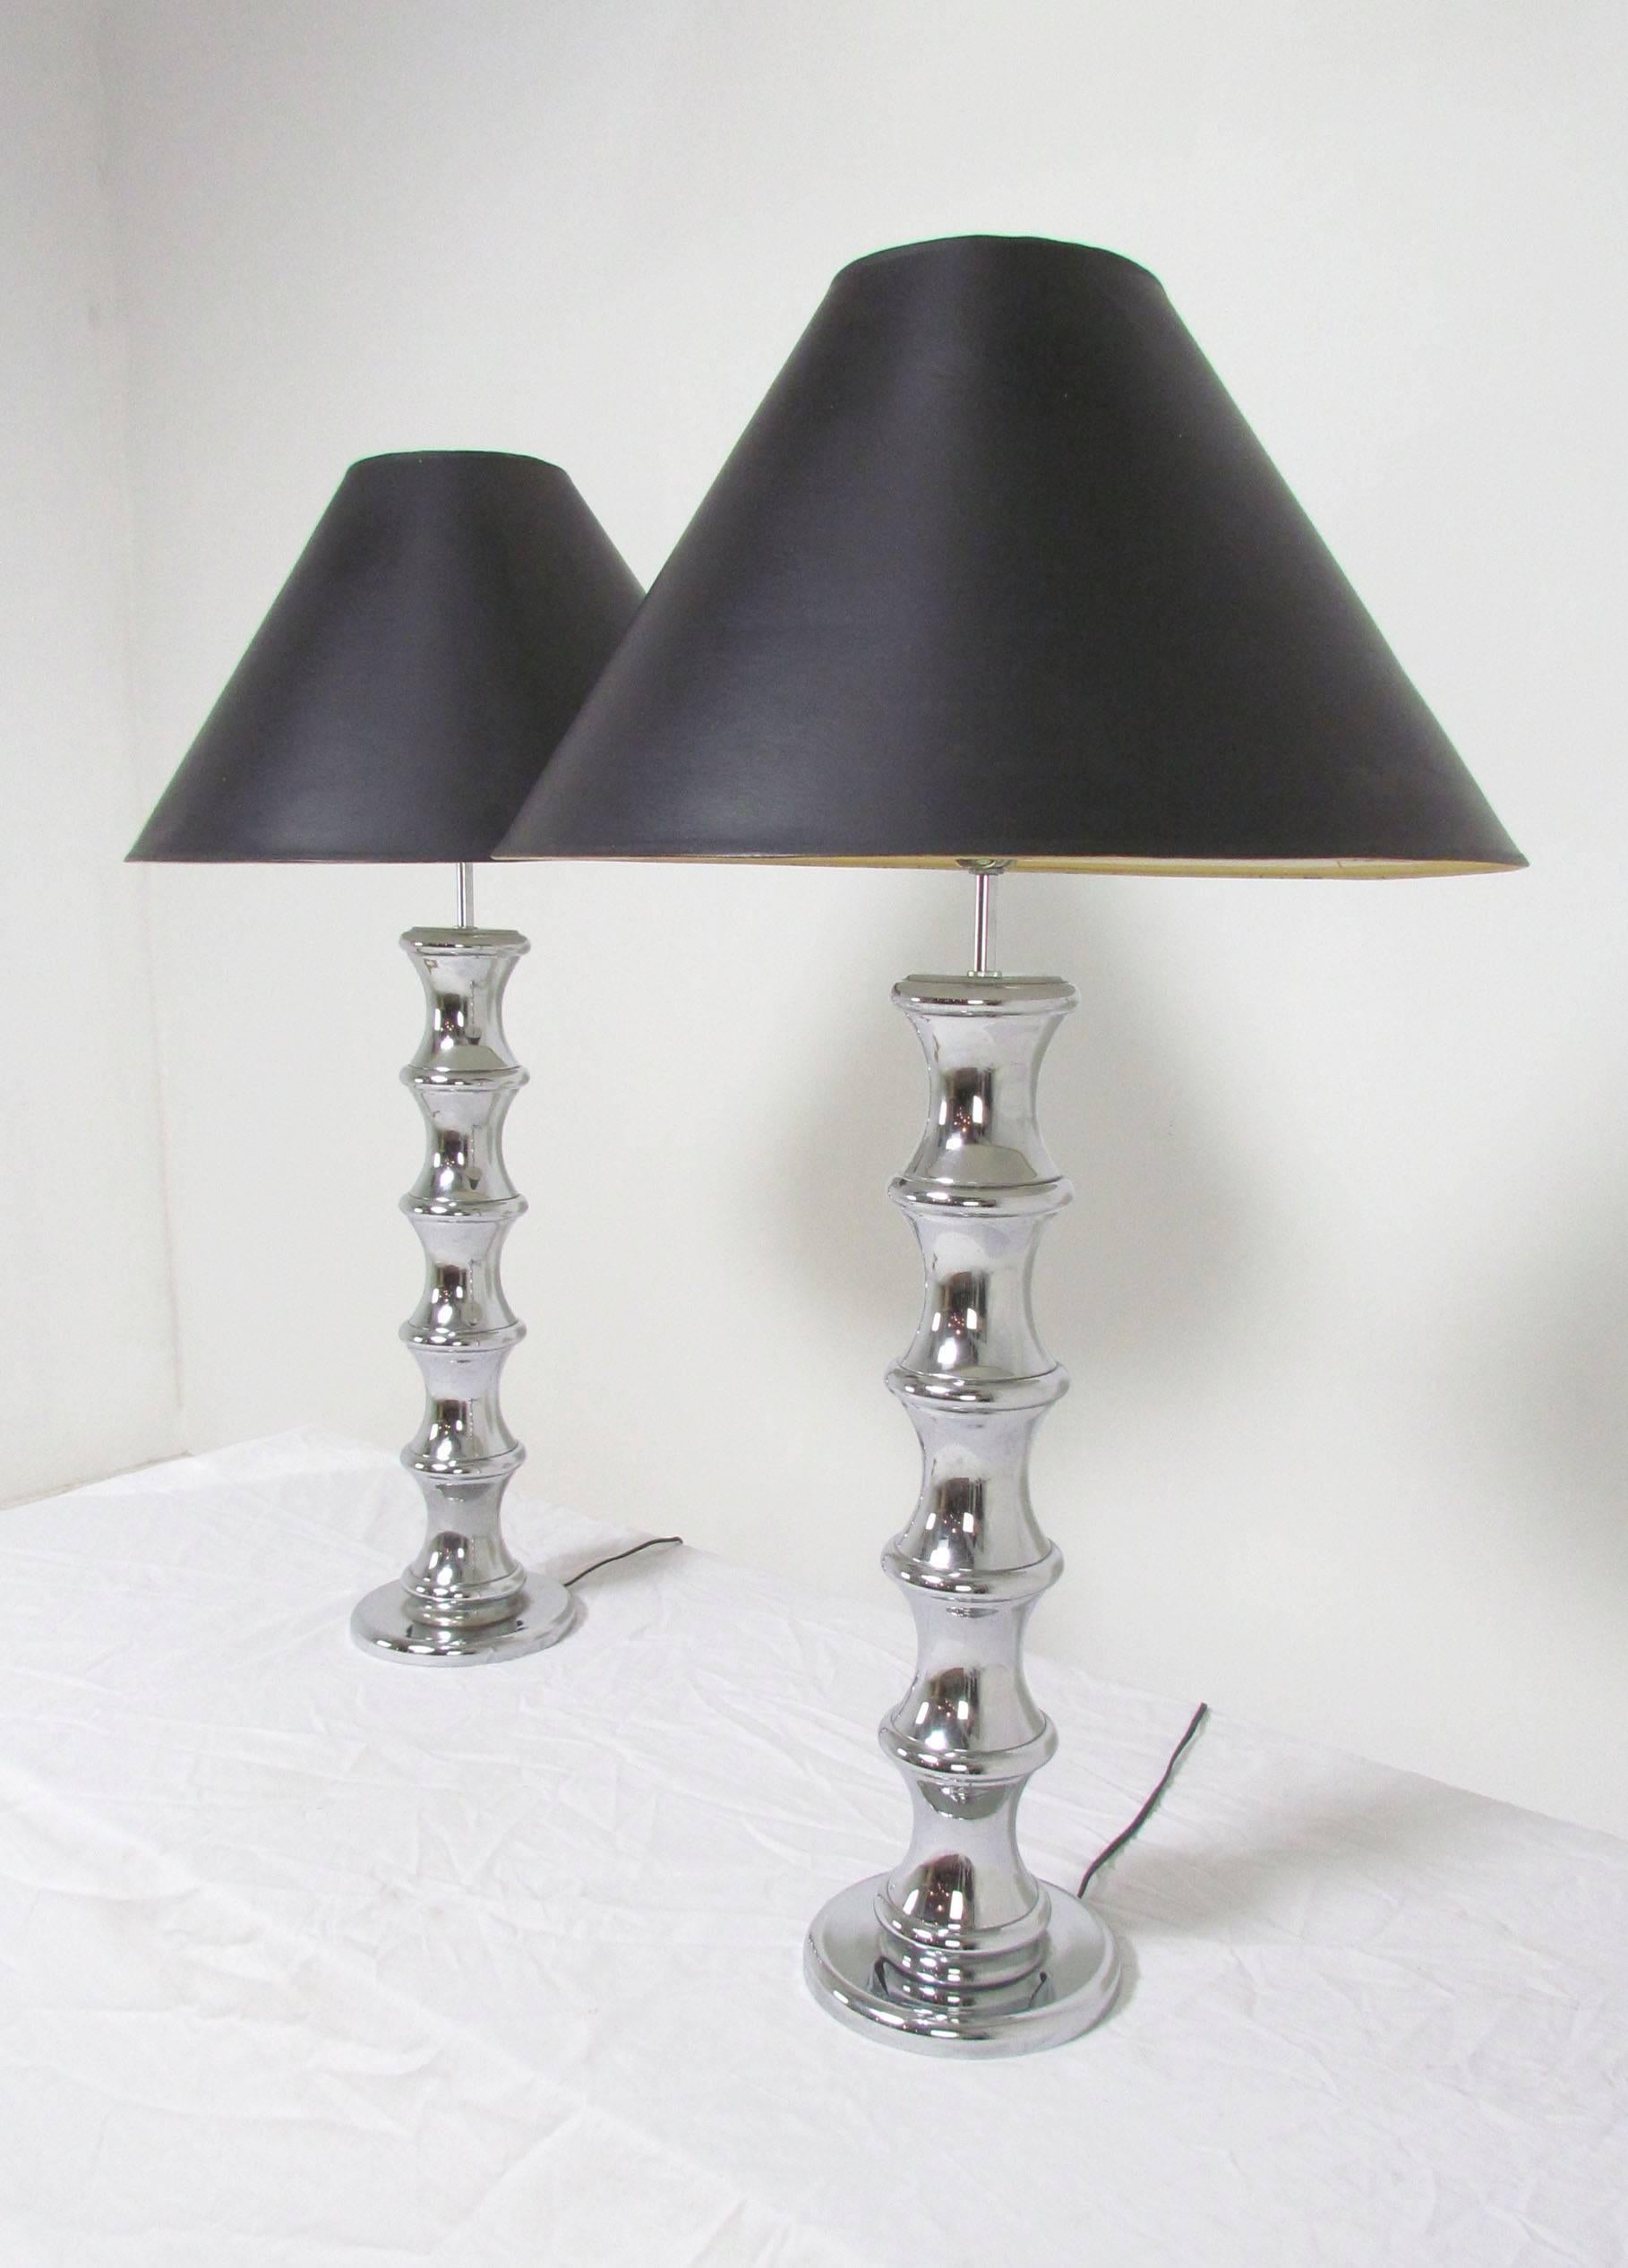 Pair of rare chrome table lamps in a faux bamboo form by Robert Sonneman, circa 1970s.

Shades are in somewhat worn condition and will be included if desired.

Lamps measure 27.5